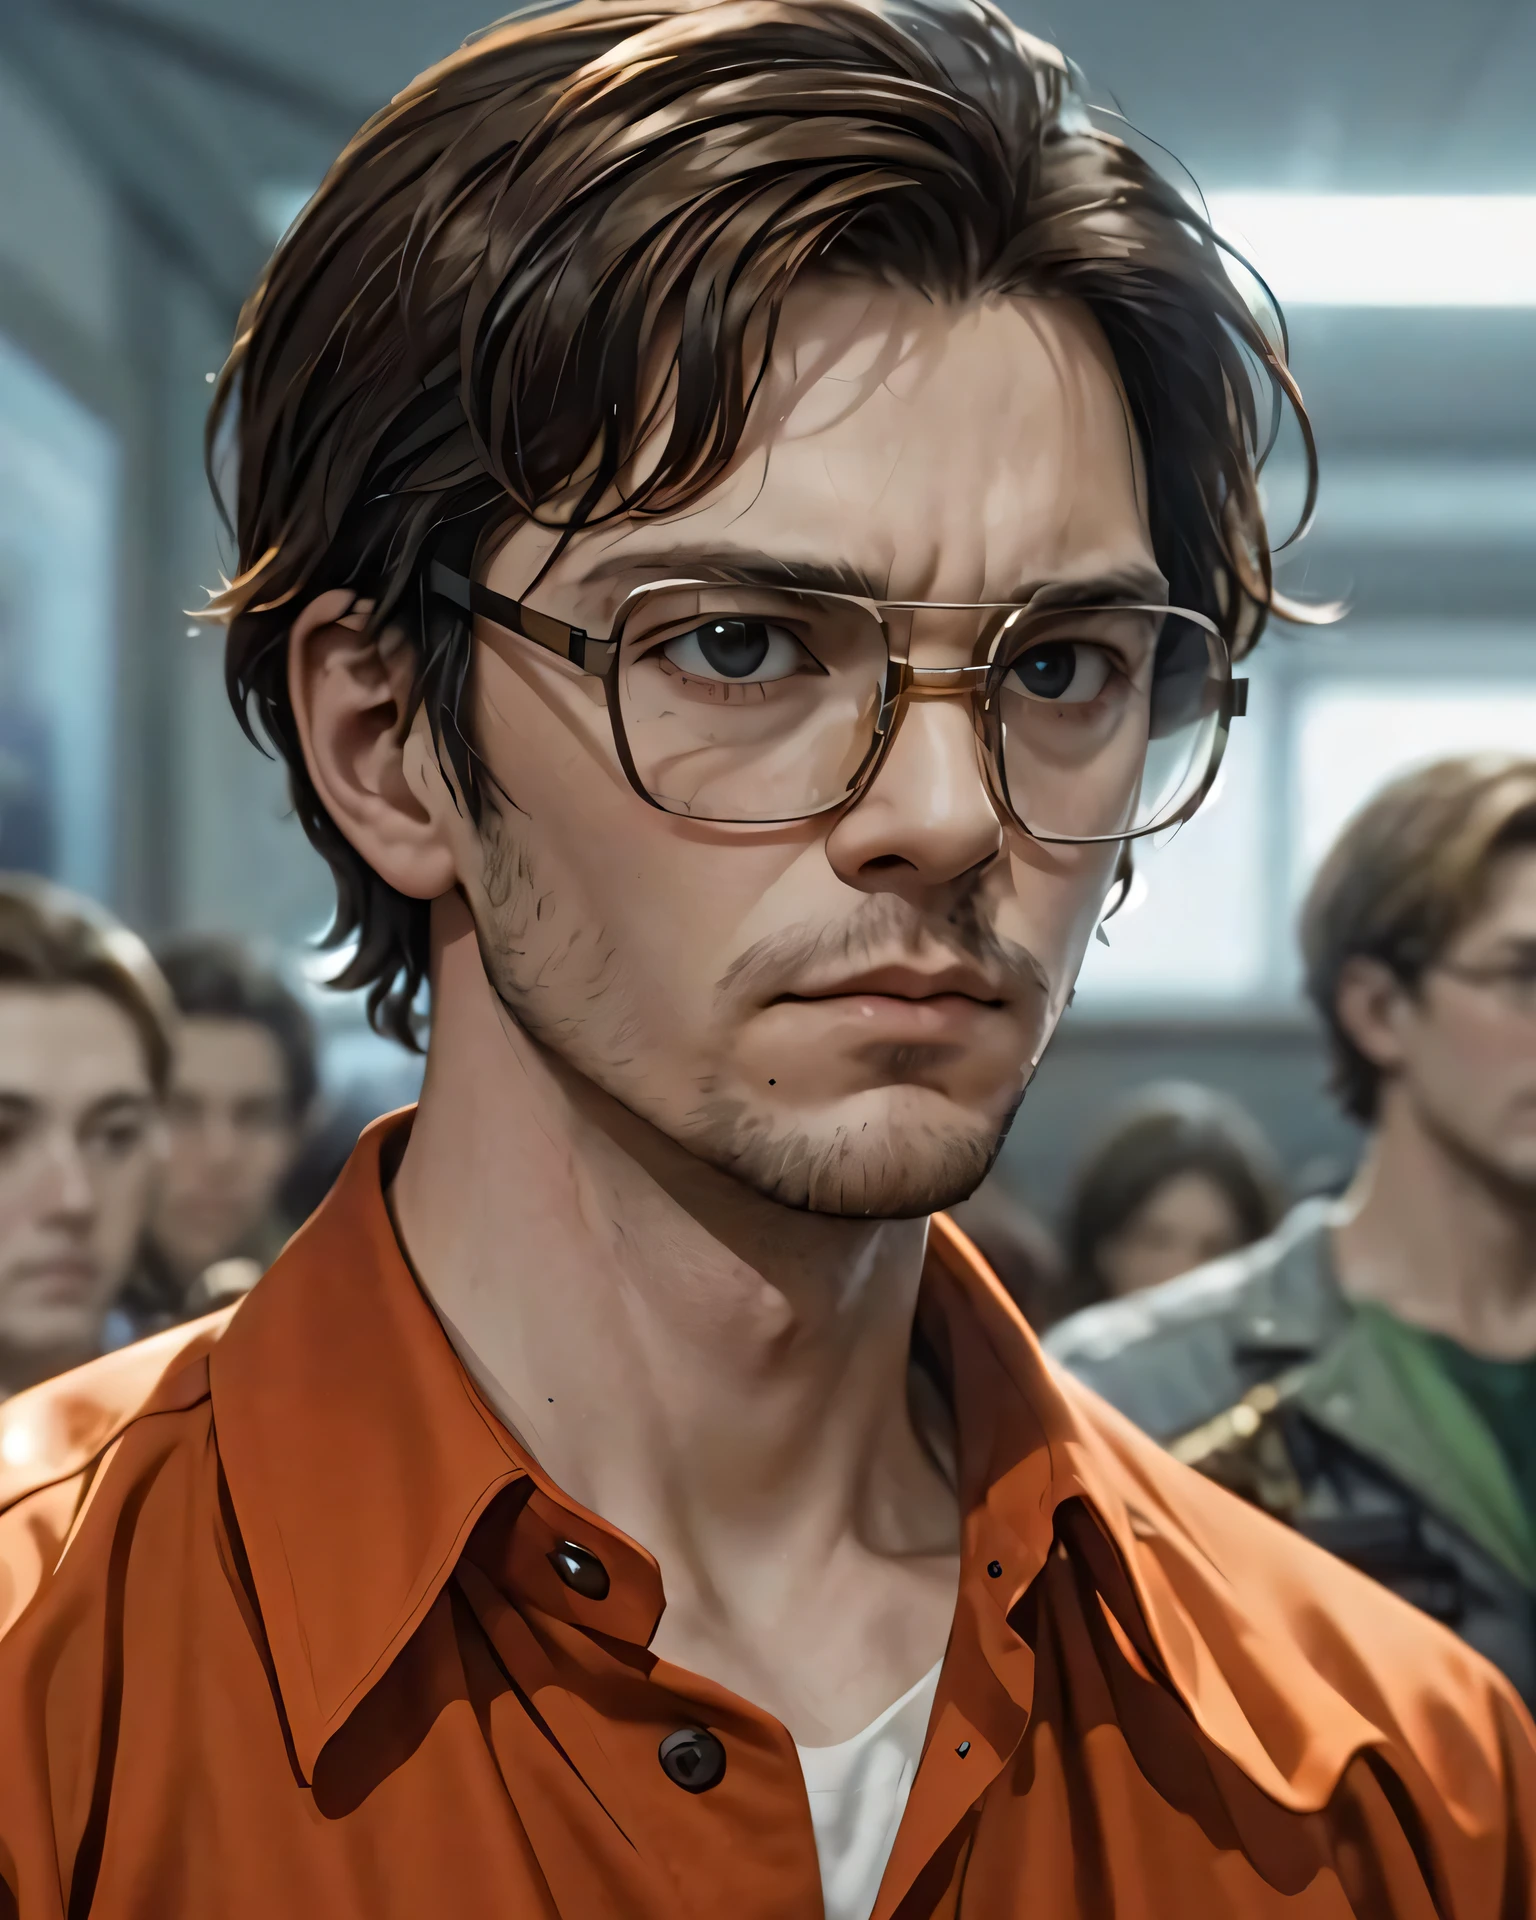 best quality, jeffreydahmer, a man with glasses and orange shirt standing in front of a group of people in a courtroom, closeup, blurry background